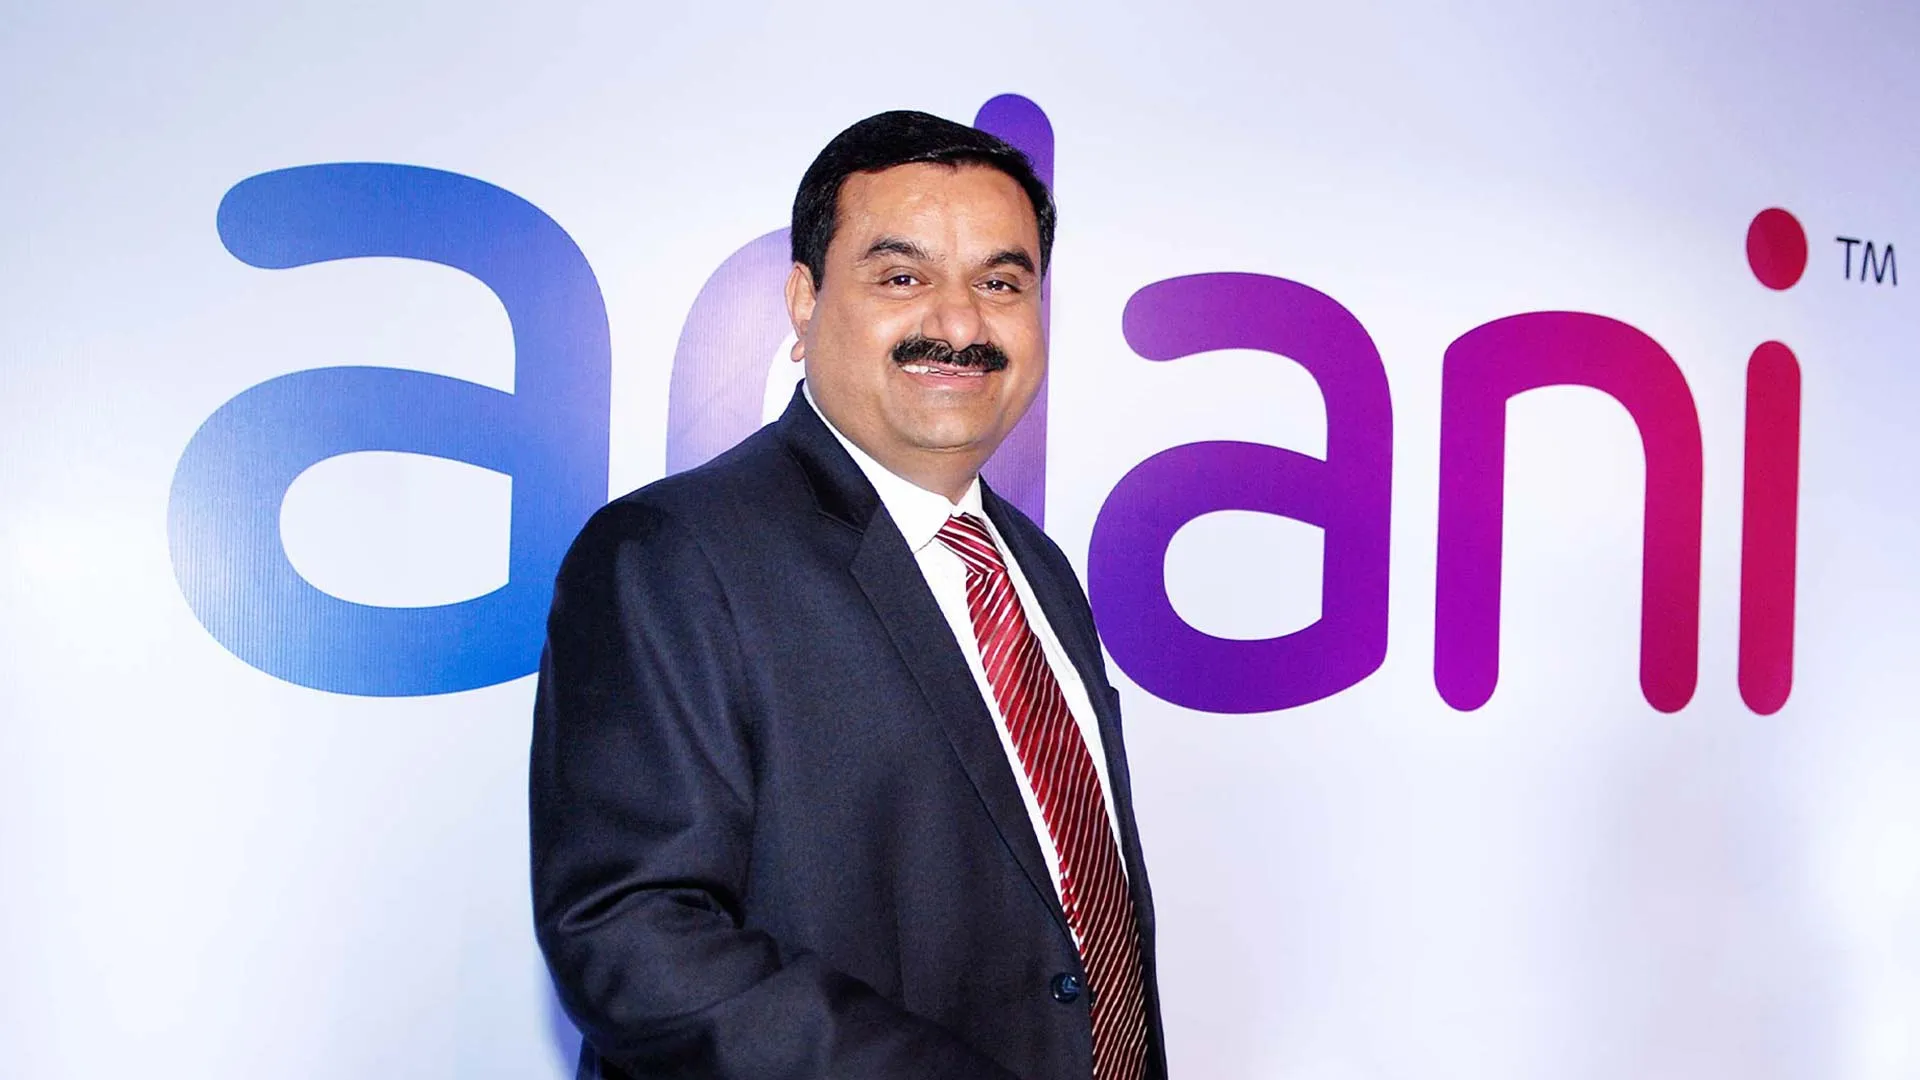 Gautam Adani invests Rs 60,000 crore in Rajasthan for two hospitals and one cricket stadium